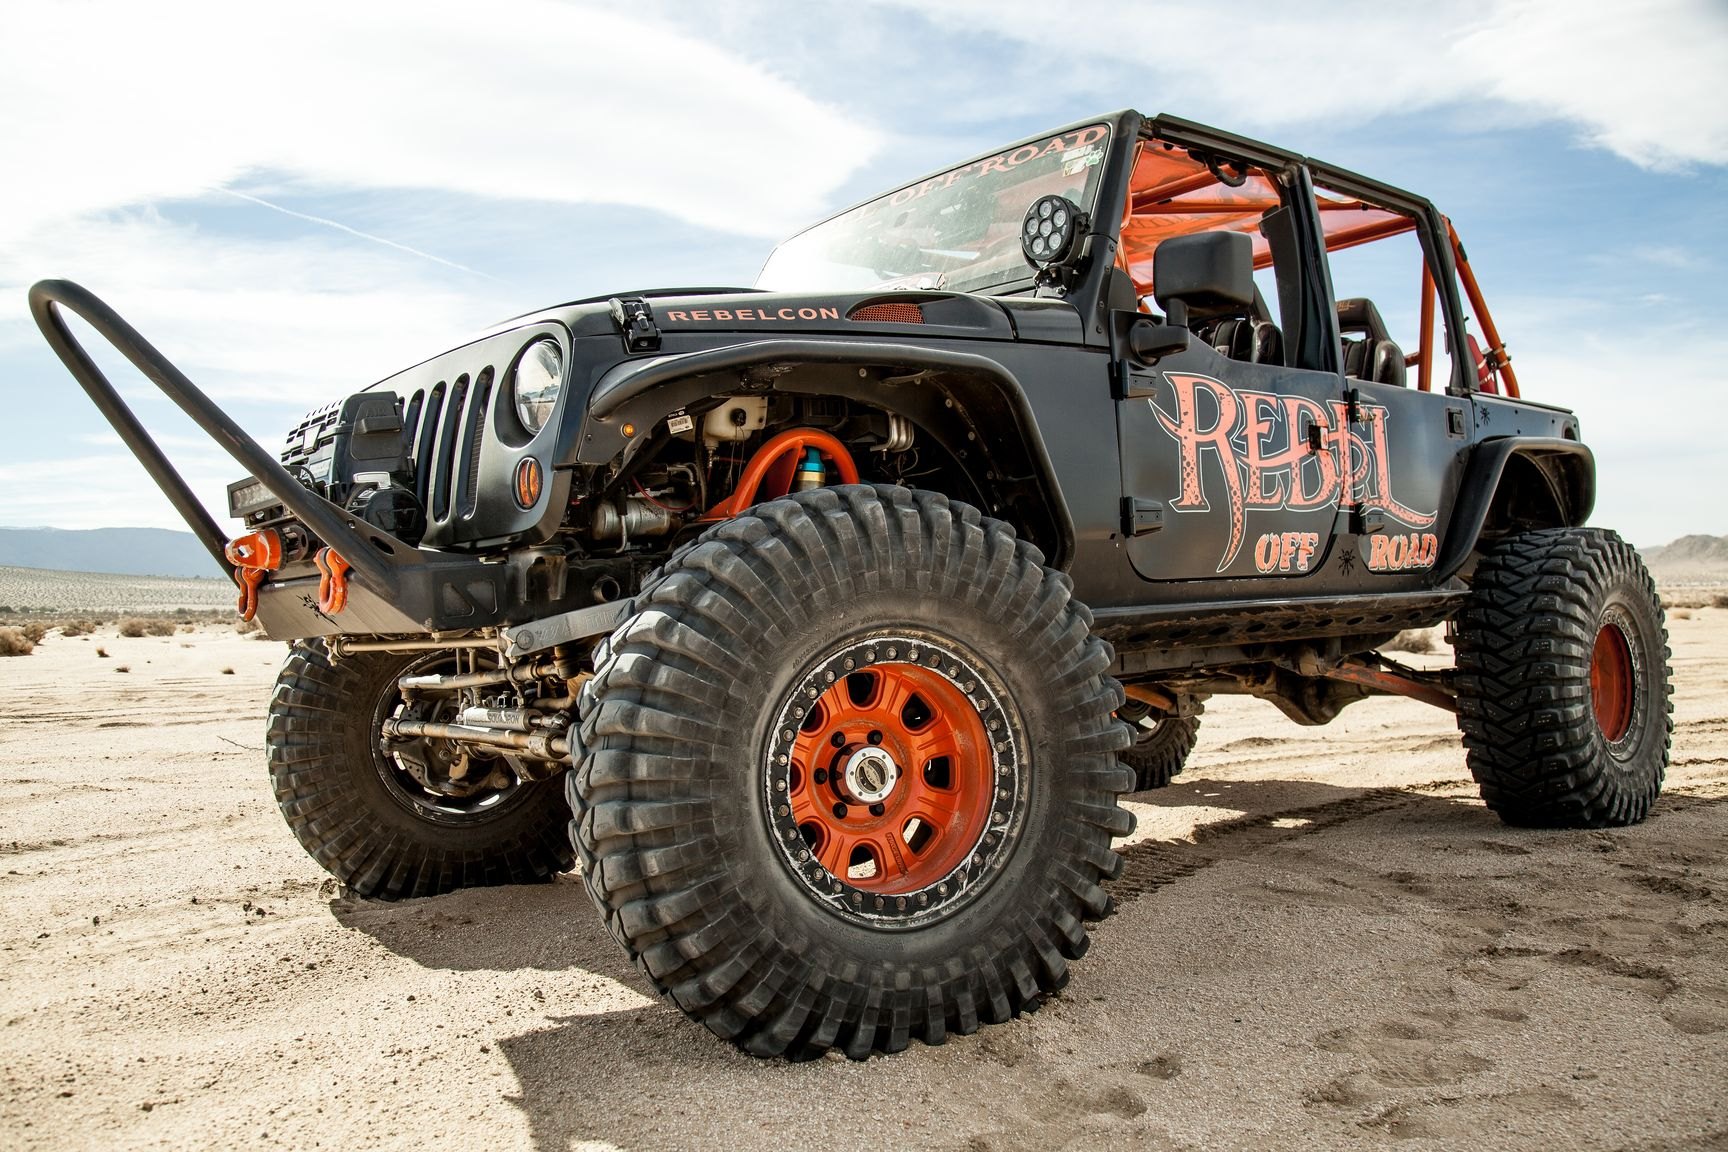 Black Lifted Jeep Wrangler Rebelcon with Custom Front Bumper - Photo by Rebel Off-Road